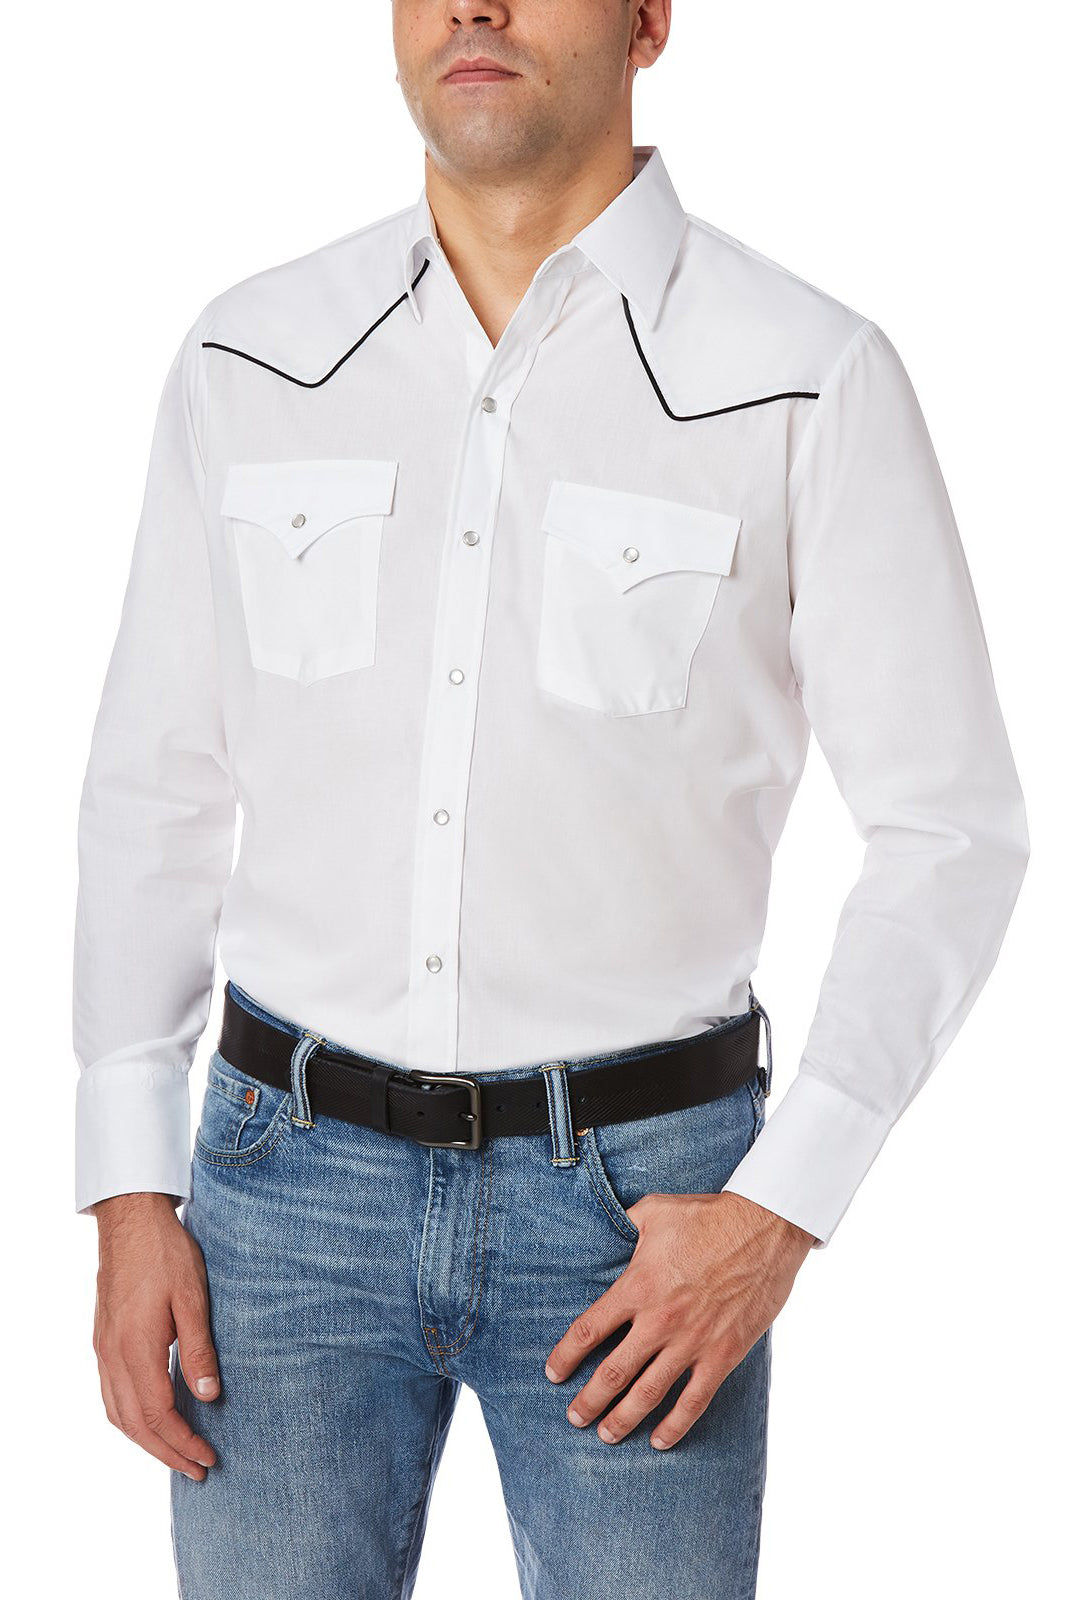 Men's Long Sleeve Western Shirt with 